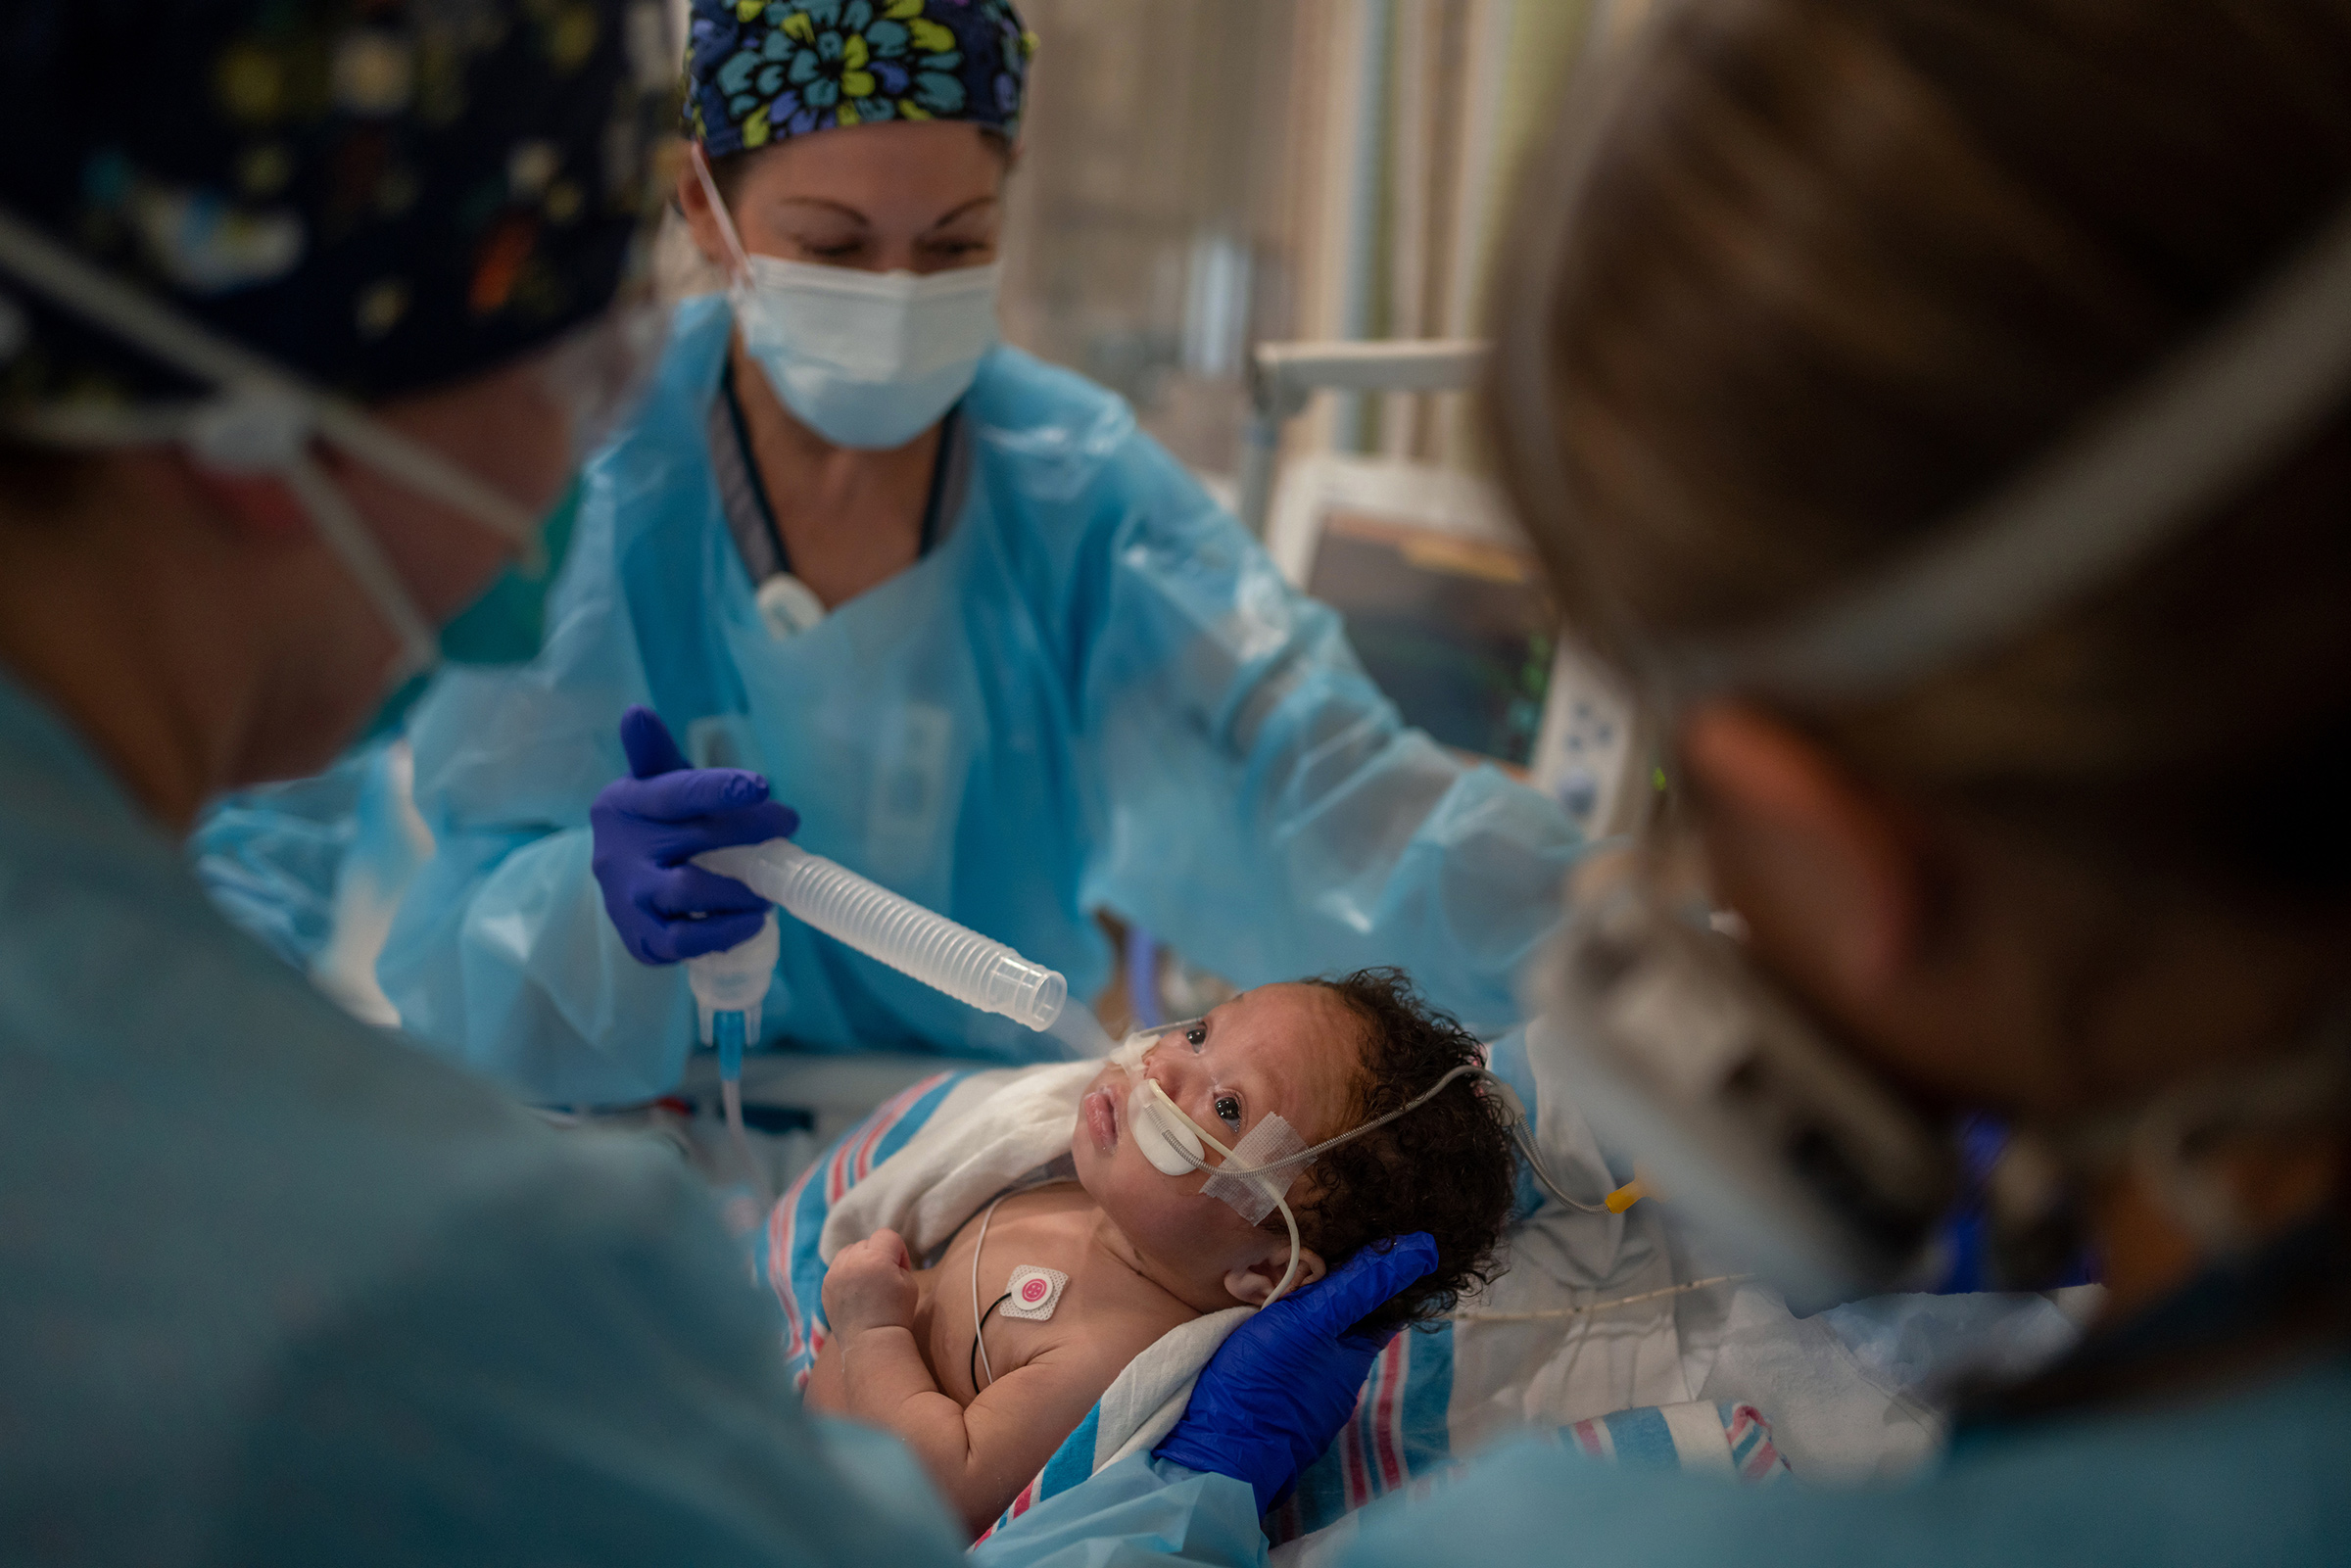 Respiratory therapist Diane Gelpi administers oxygen to two-month-old Carvase Perrilloux after he was taken off a ventilator at Children’s Hospital New Orleans on Aug. 20, 2021. (Kathleen Flynn for TIME)